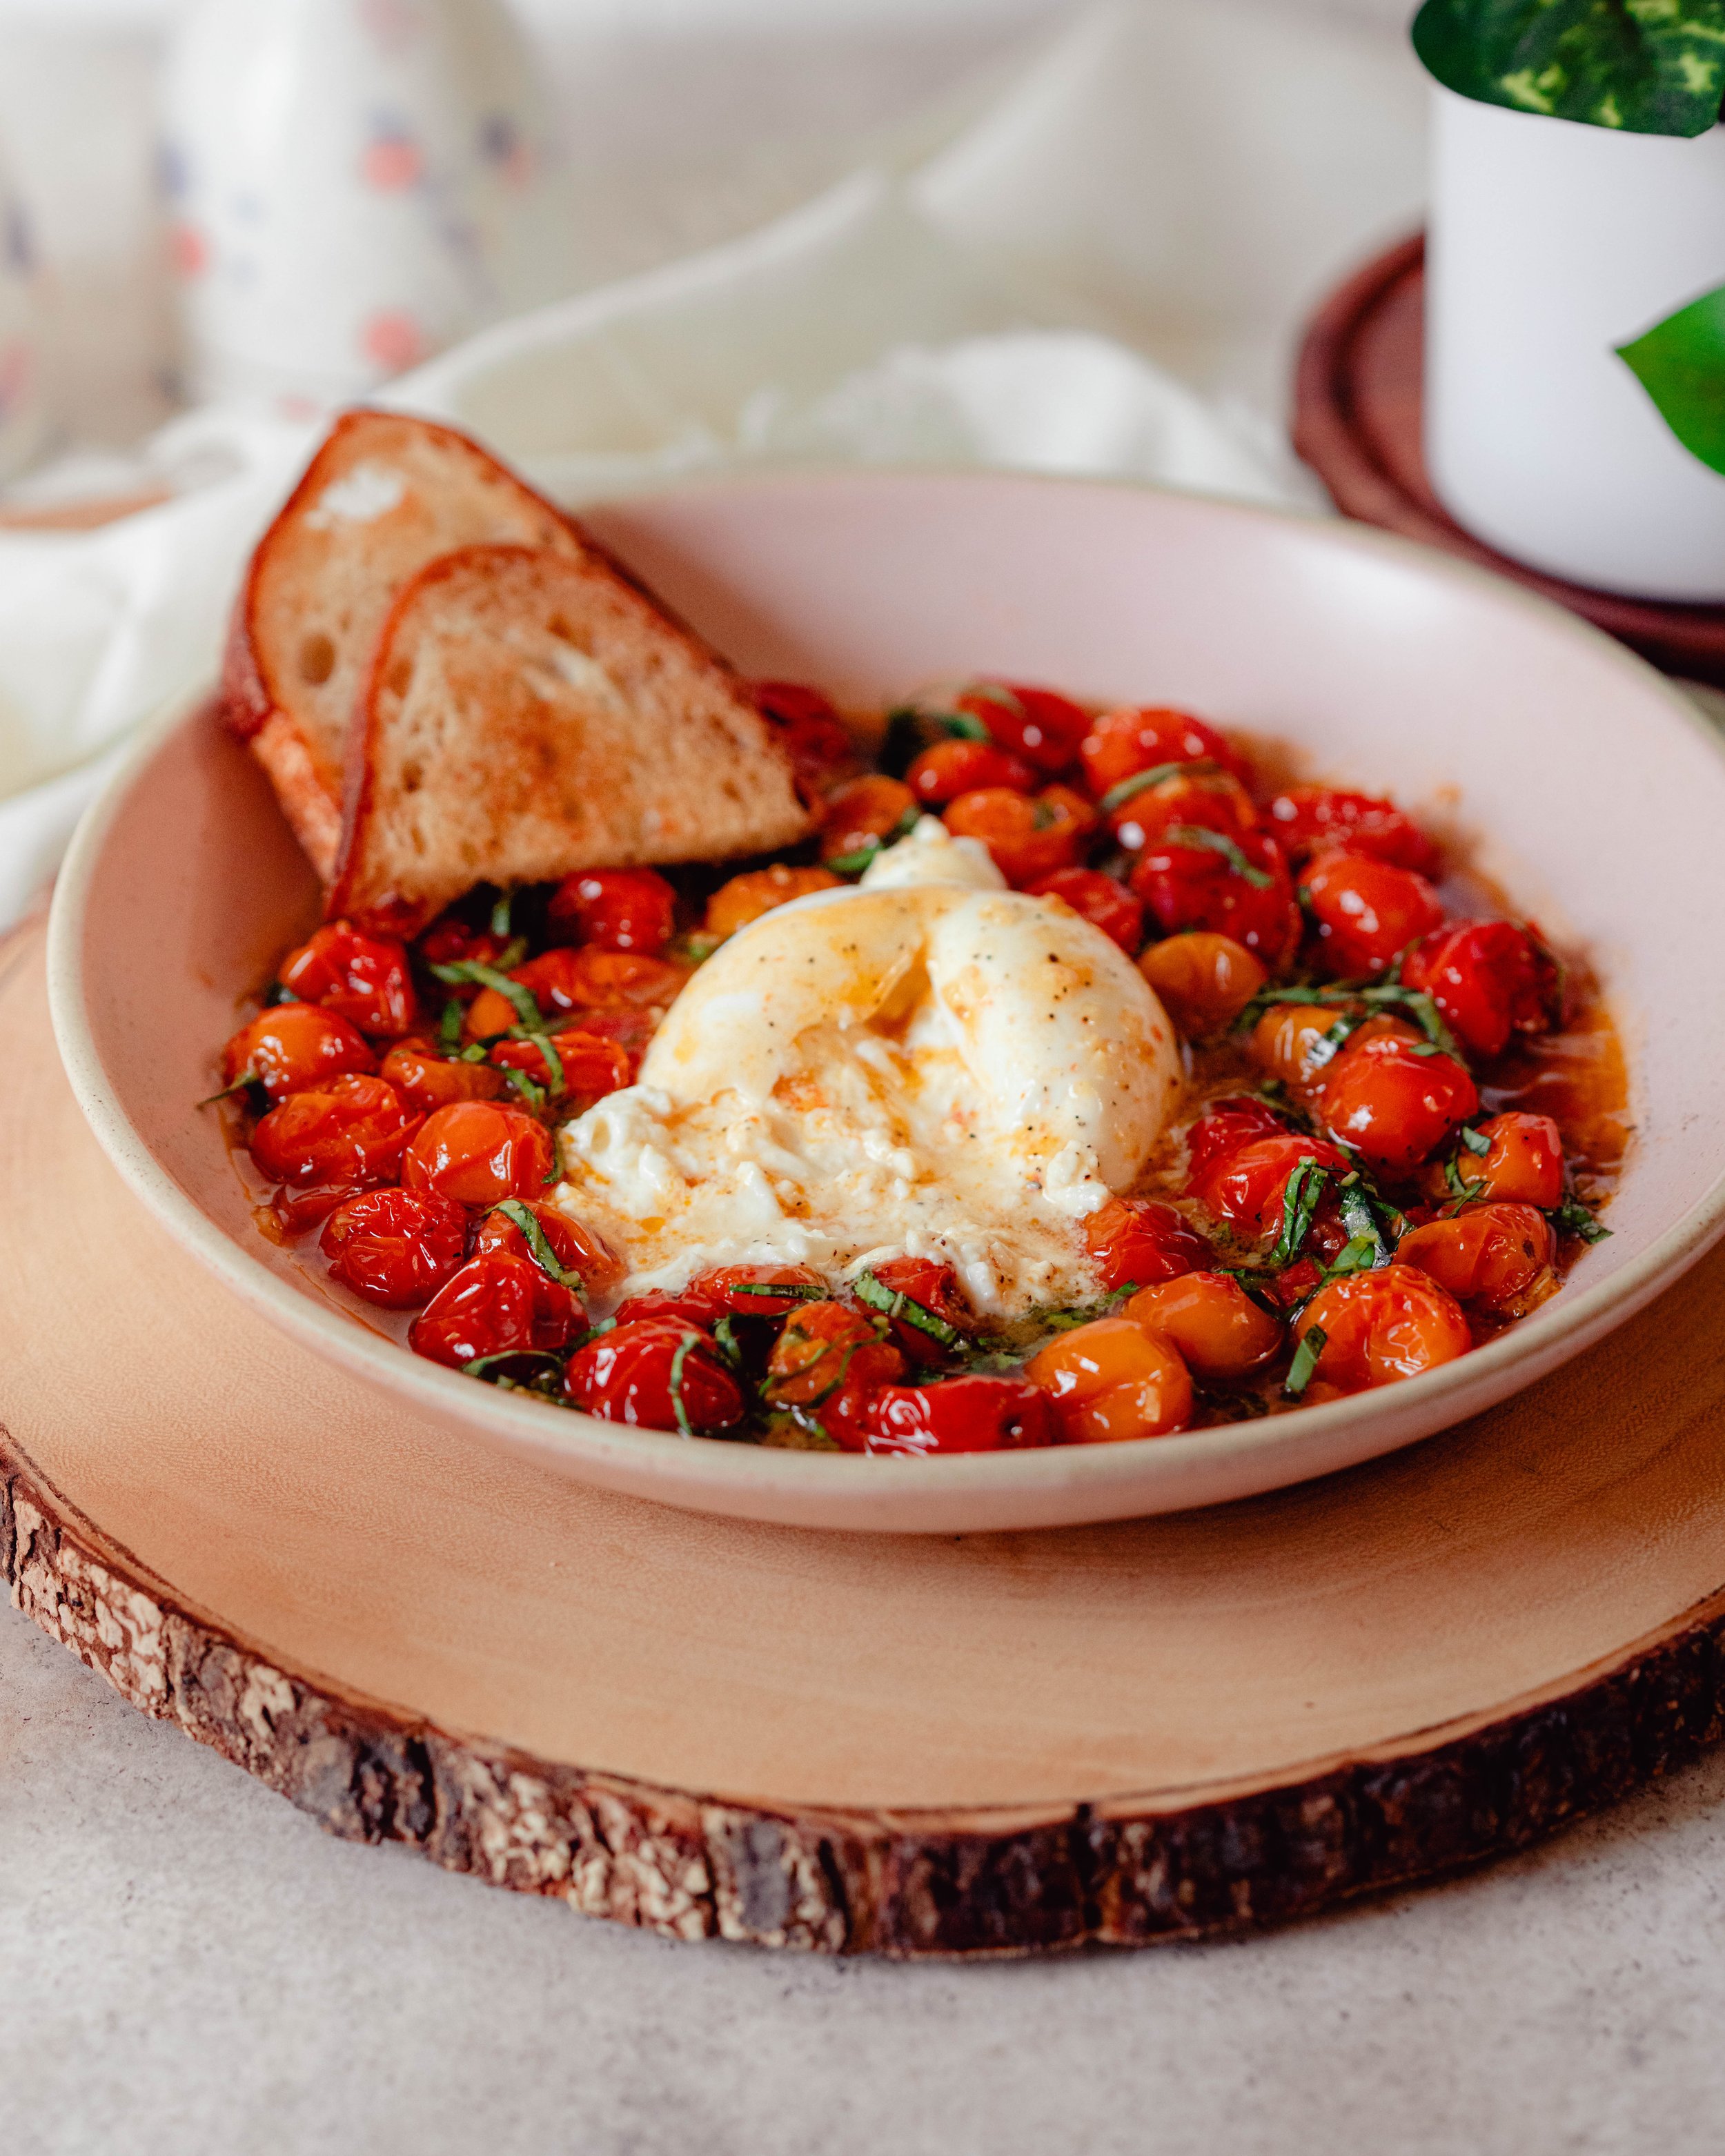 Warm Burrata and Roasted Tomatoes - The Cheese Knees